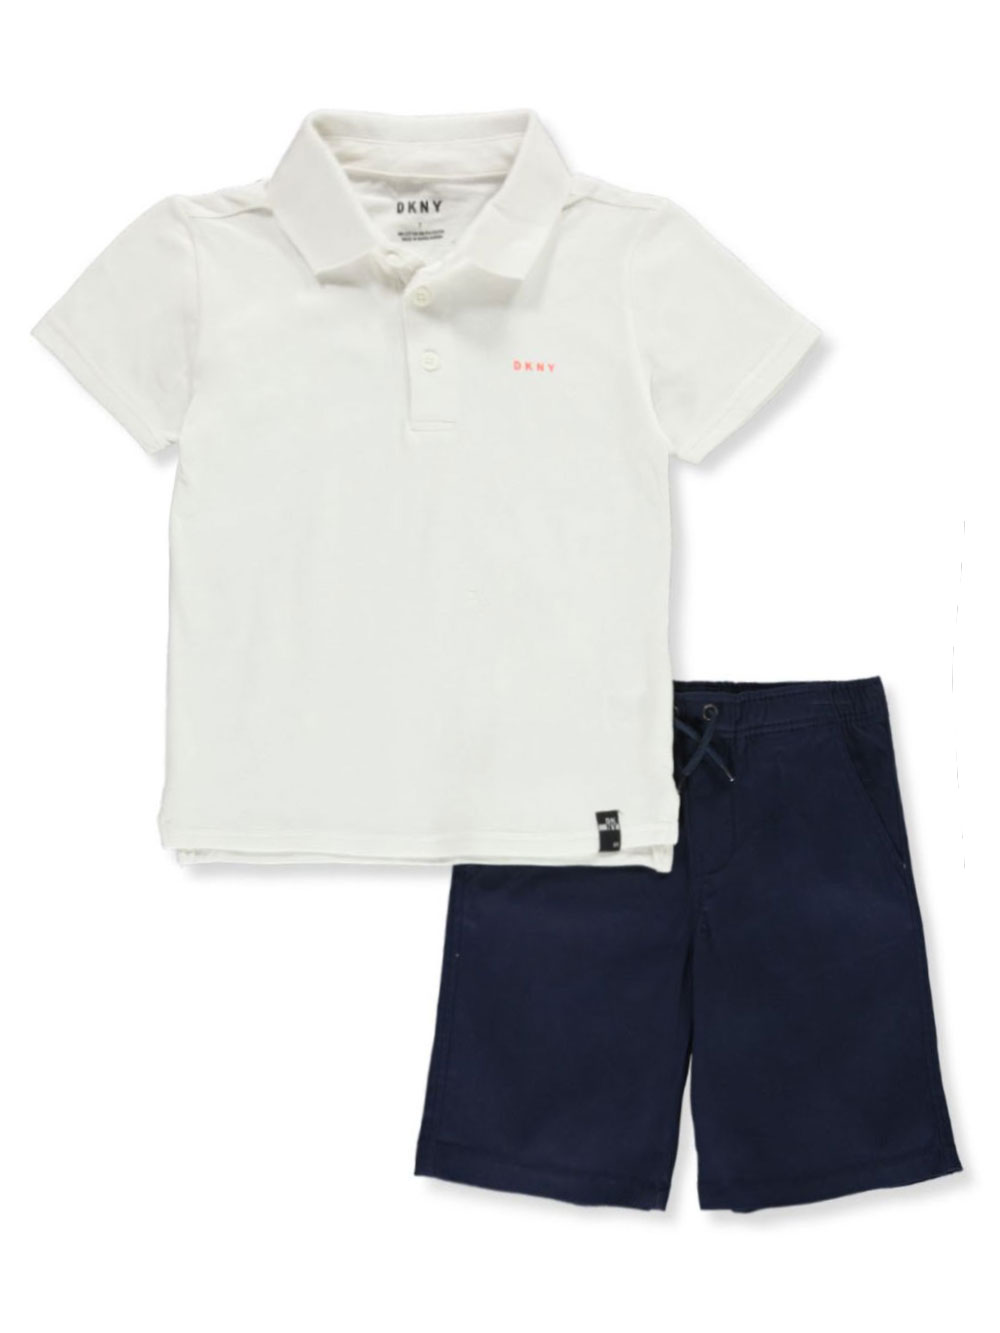 Cotton Twill 2-Piece Shorts Set Outfit